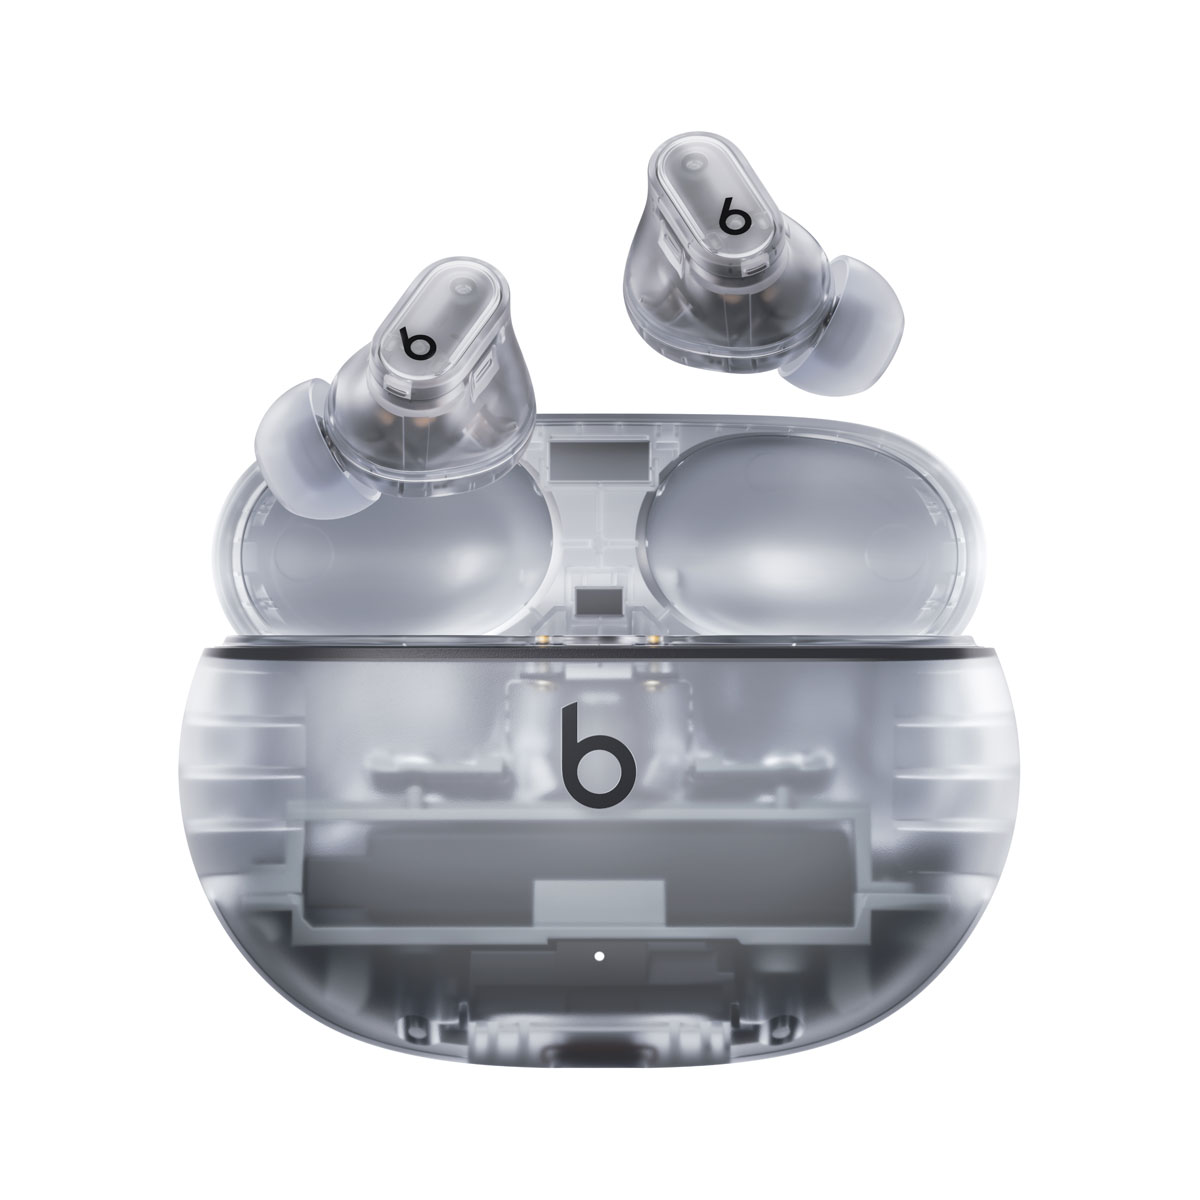 Beats headphones and earphones are now on sale! Beats Studio Pro - Now $249: howl.me/cmaf5KmcrBE Beats Studio Buds+ - Now $129: howl.me/cmaf7QPeyr5 The Airpods experience for up to $300 less